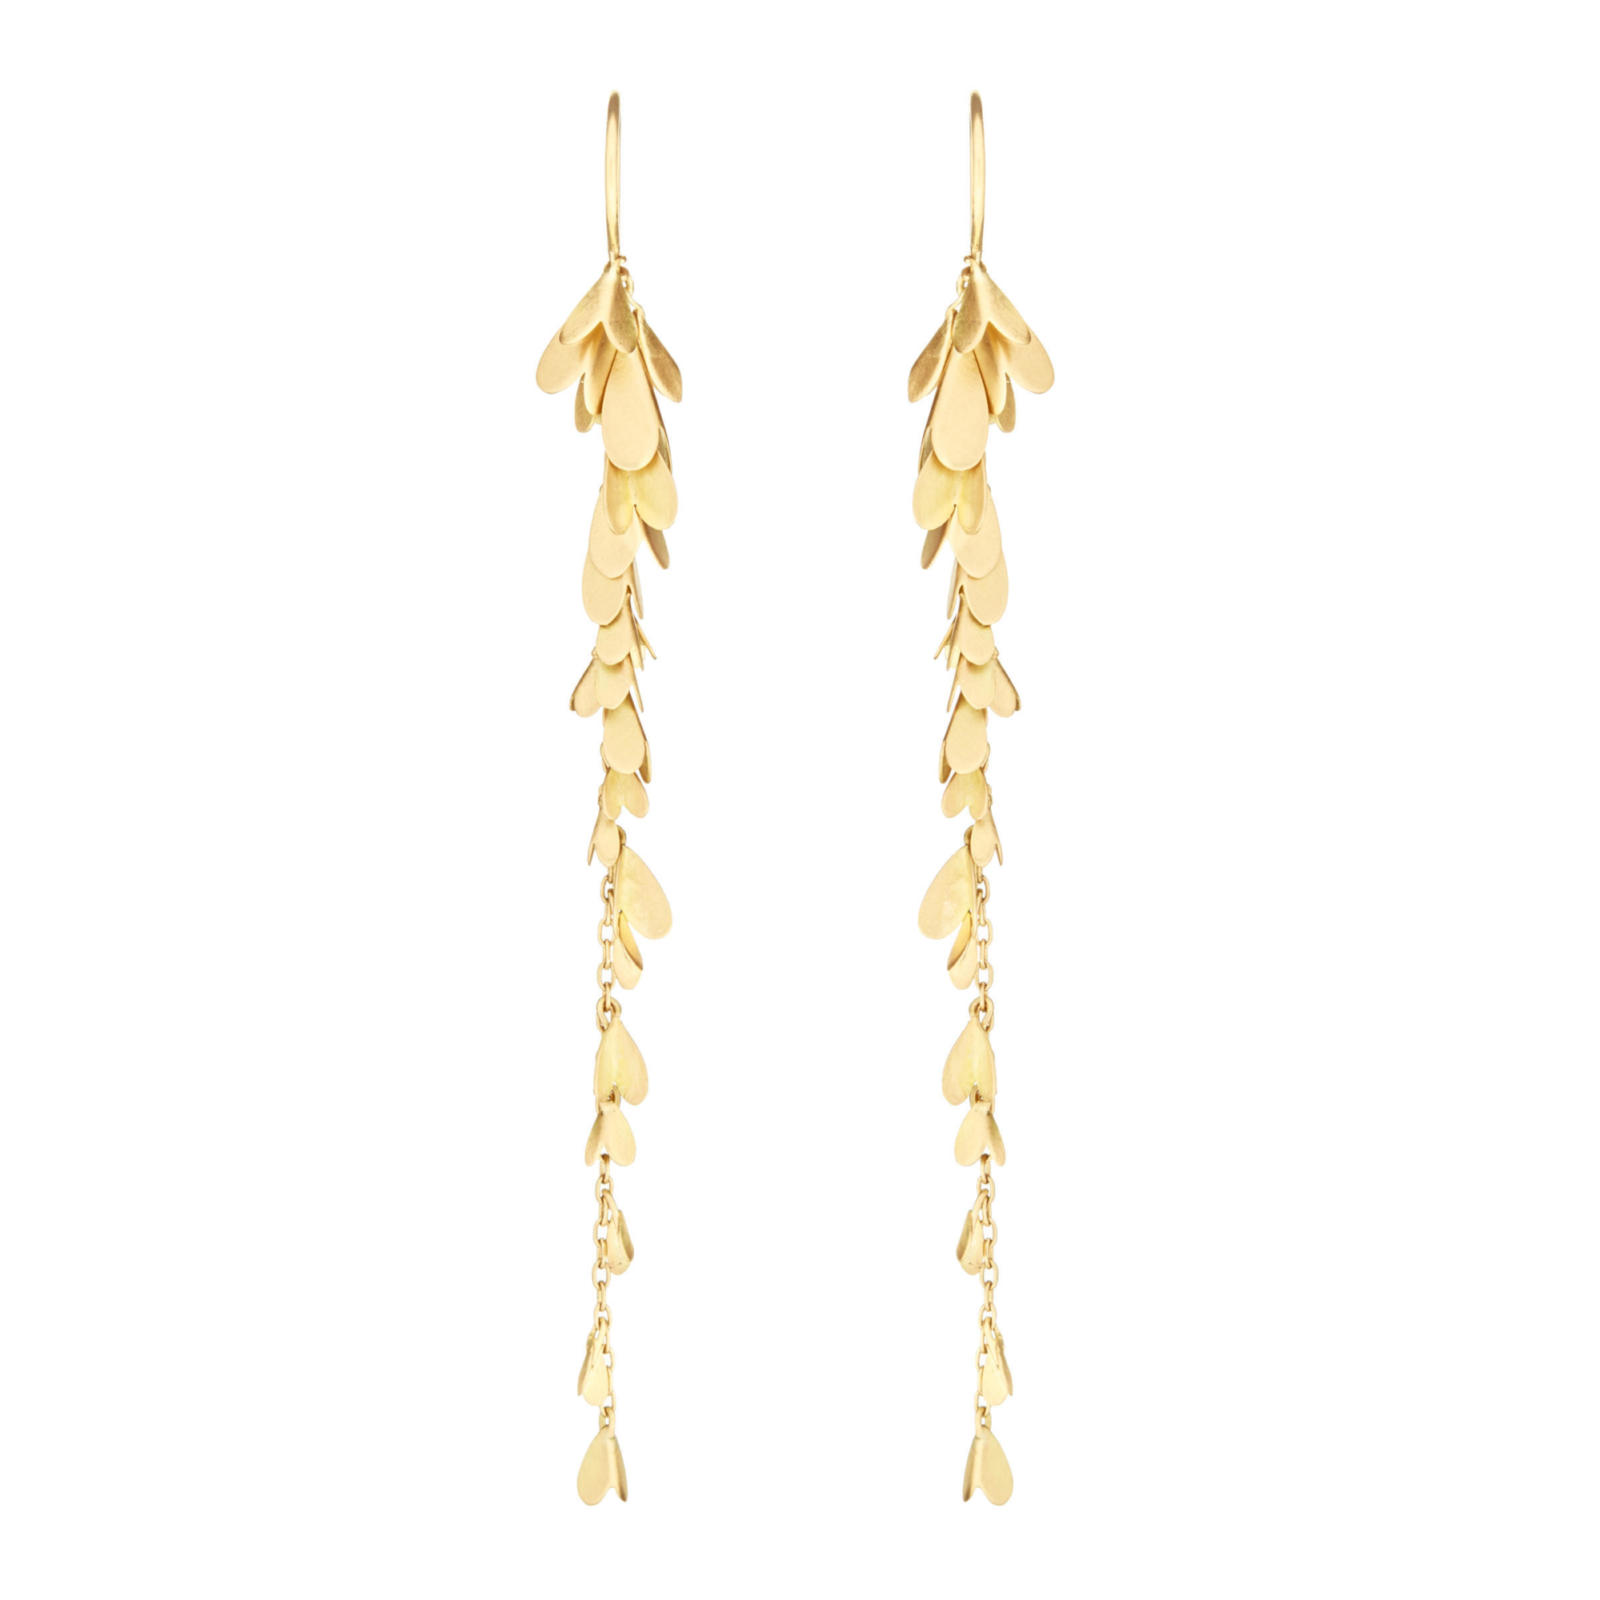 Sia Taylor ME6 Y Yellow Gold Earrings WB